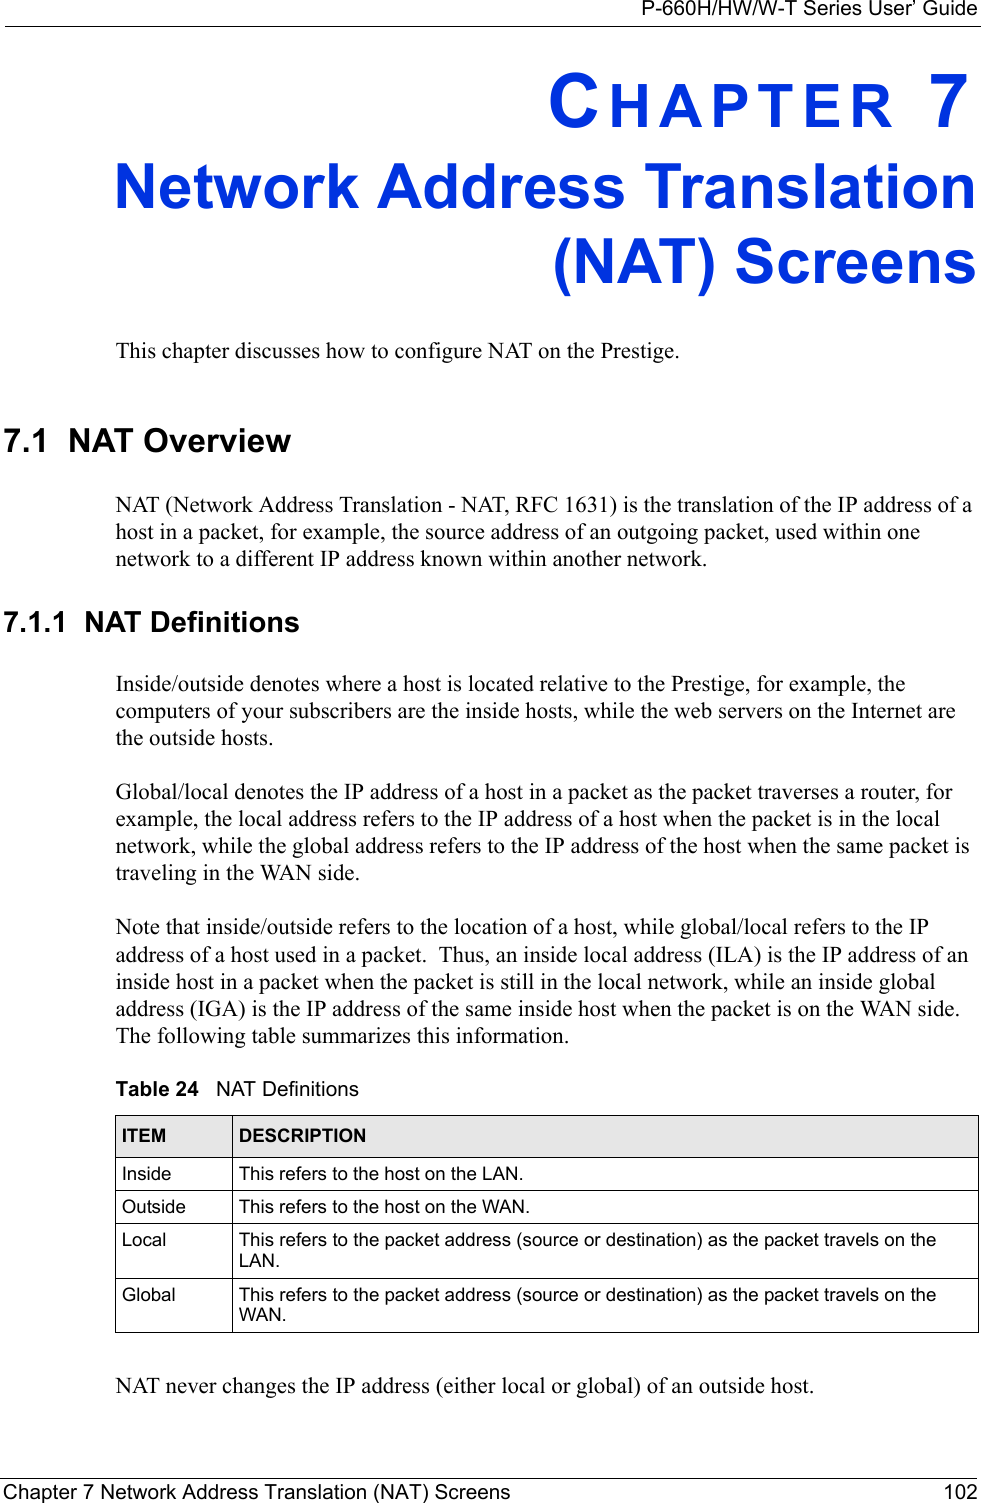 P-660H/HW/W-T Series User’ GuideChapter 7 Network Address Translation (NAT) Screens 102CHAPTER 7Network Address Translation(NAT) ScreensThis chapter discusses how to configure NAT on the Prestige.7.1  NAT Overview NAT (Network Address Translation - NAT, RFC 1631) is the translation of the IP address of a host in a packet, for example, the source address of an outgoing packet, used within one network to a different IP address known within another network. 7.1.1  NAT DefinitionsInside/outside denotes where a host is located relative to the Prestige, for example, the computers of your subscribers are the inside hosts, while the web servers on the Internet are the outside hosts. Global/local denotes the IP address of a host in a packet as the packet traverses a router, for example, the local address refers to the IP address of a host when the packet is in the local network, while the global address refers to the IP address of the host when the same packet is traveling in the WAN side. Note that inside/outside refers to the location of a host, while global/local refers to the IP address of a host used in a packet.  Thus, an inside local address (ILA) is the IP address of an inside host in a packet when the packet is still in the local network, while an inside global address (IGA) is the IP address of the same inside host when the packet is on the WAN side. The following table summarizes this information.NAT never changes the IP address (either local or global) of an outside host.Table 24   NAT DefinitionsITEM DESCRIPTIONInside This refers to the host on the LAN.Outside This refers to the host on the WAN.Local This refers to the packet address (source or destination) as the packet travels on the LAN.Global This refers to the packet address (source or destination) as the packet travels on the WAN.